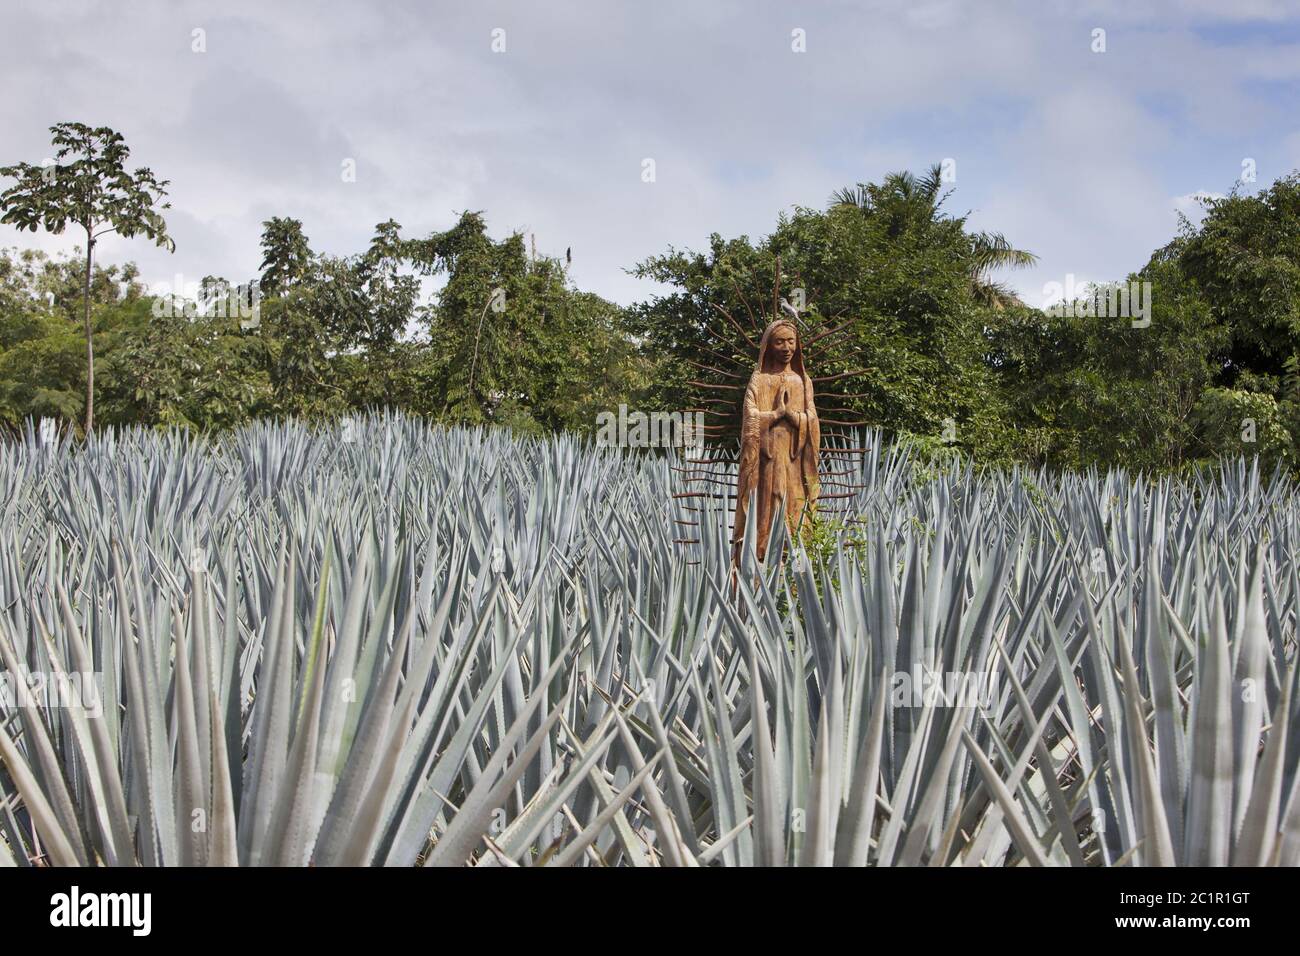 The statue of Blessed Virgin Mary in the field of agave. Mexico Stock Photo